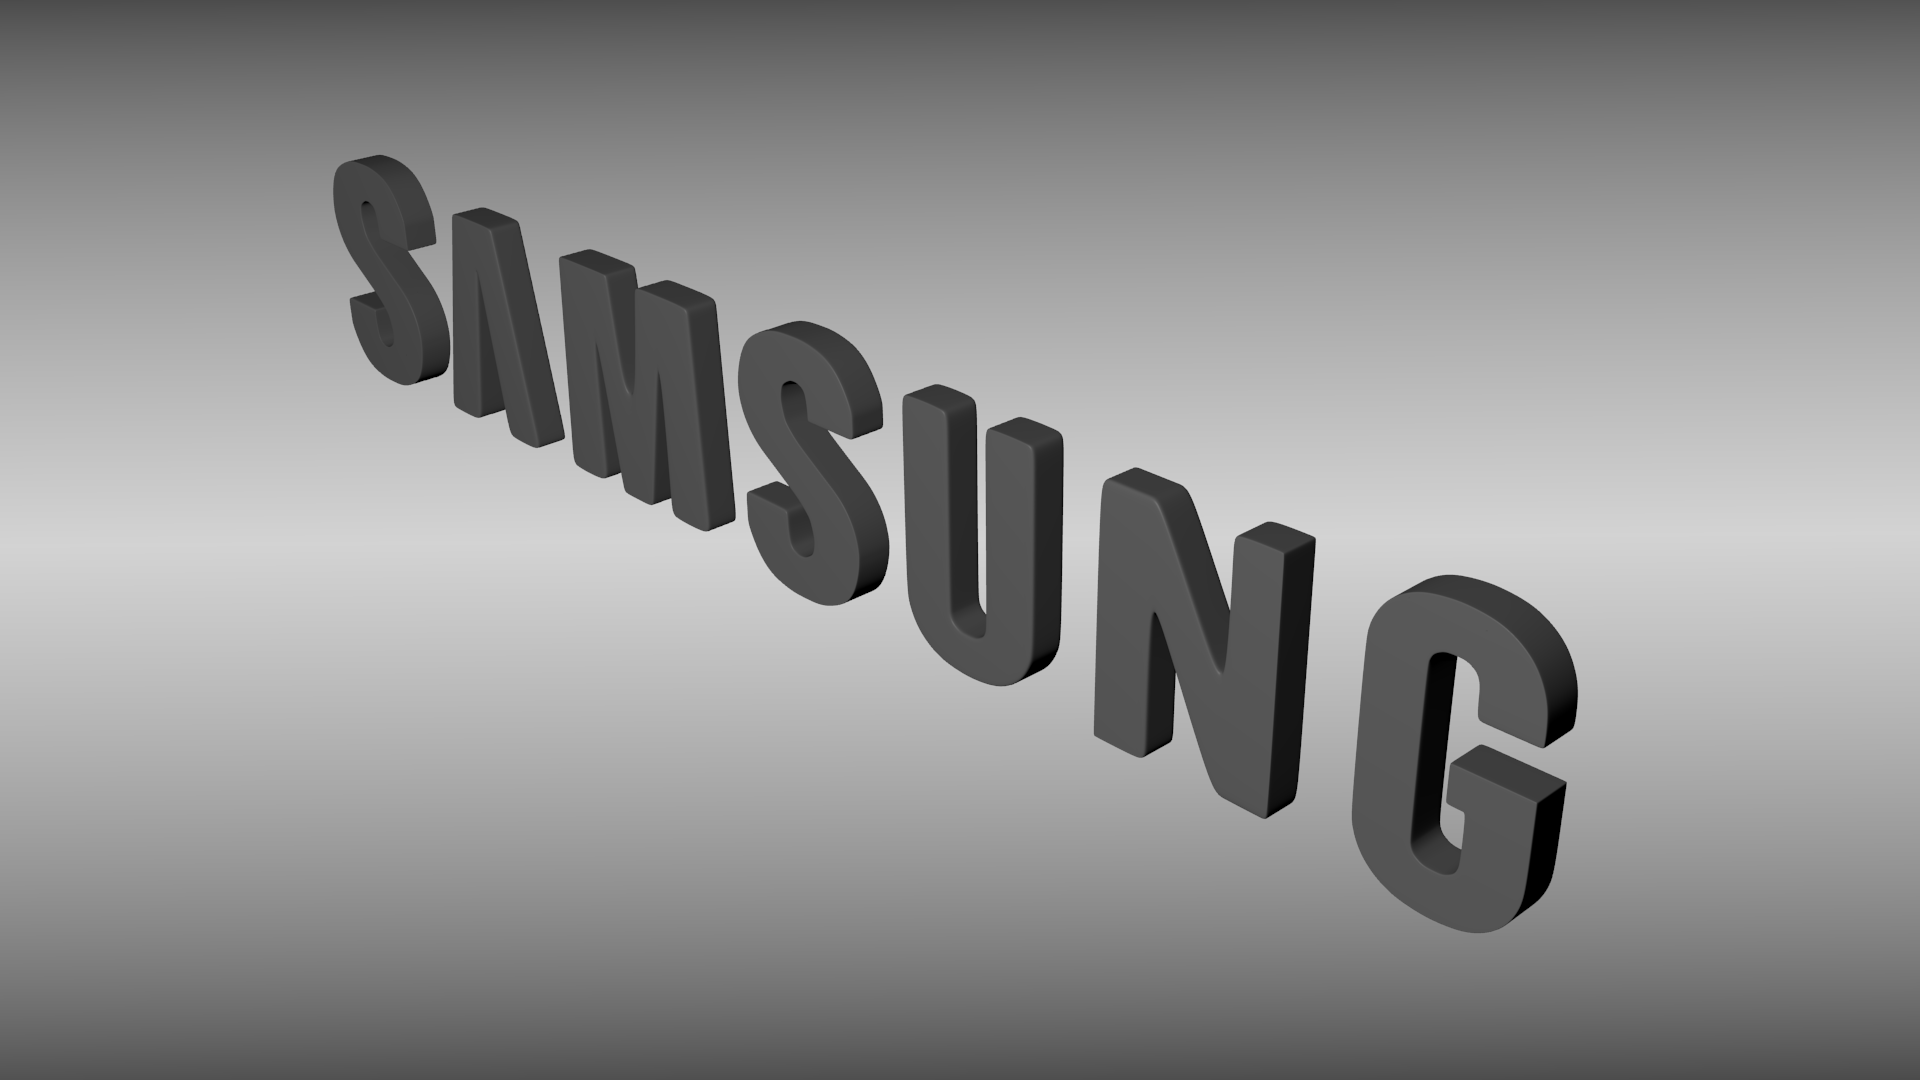 Samsung Electronics Now Ranked No. 1 in Enterprise SSD Market